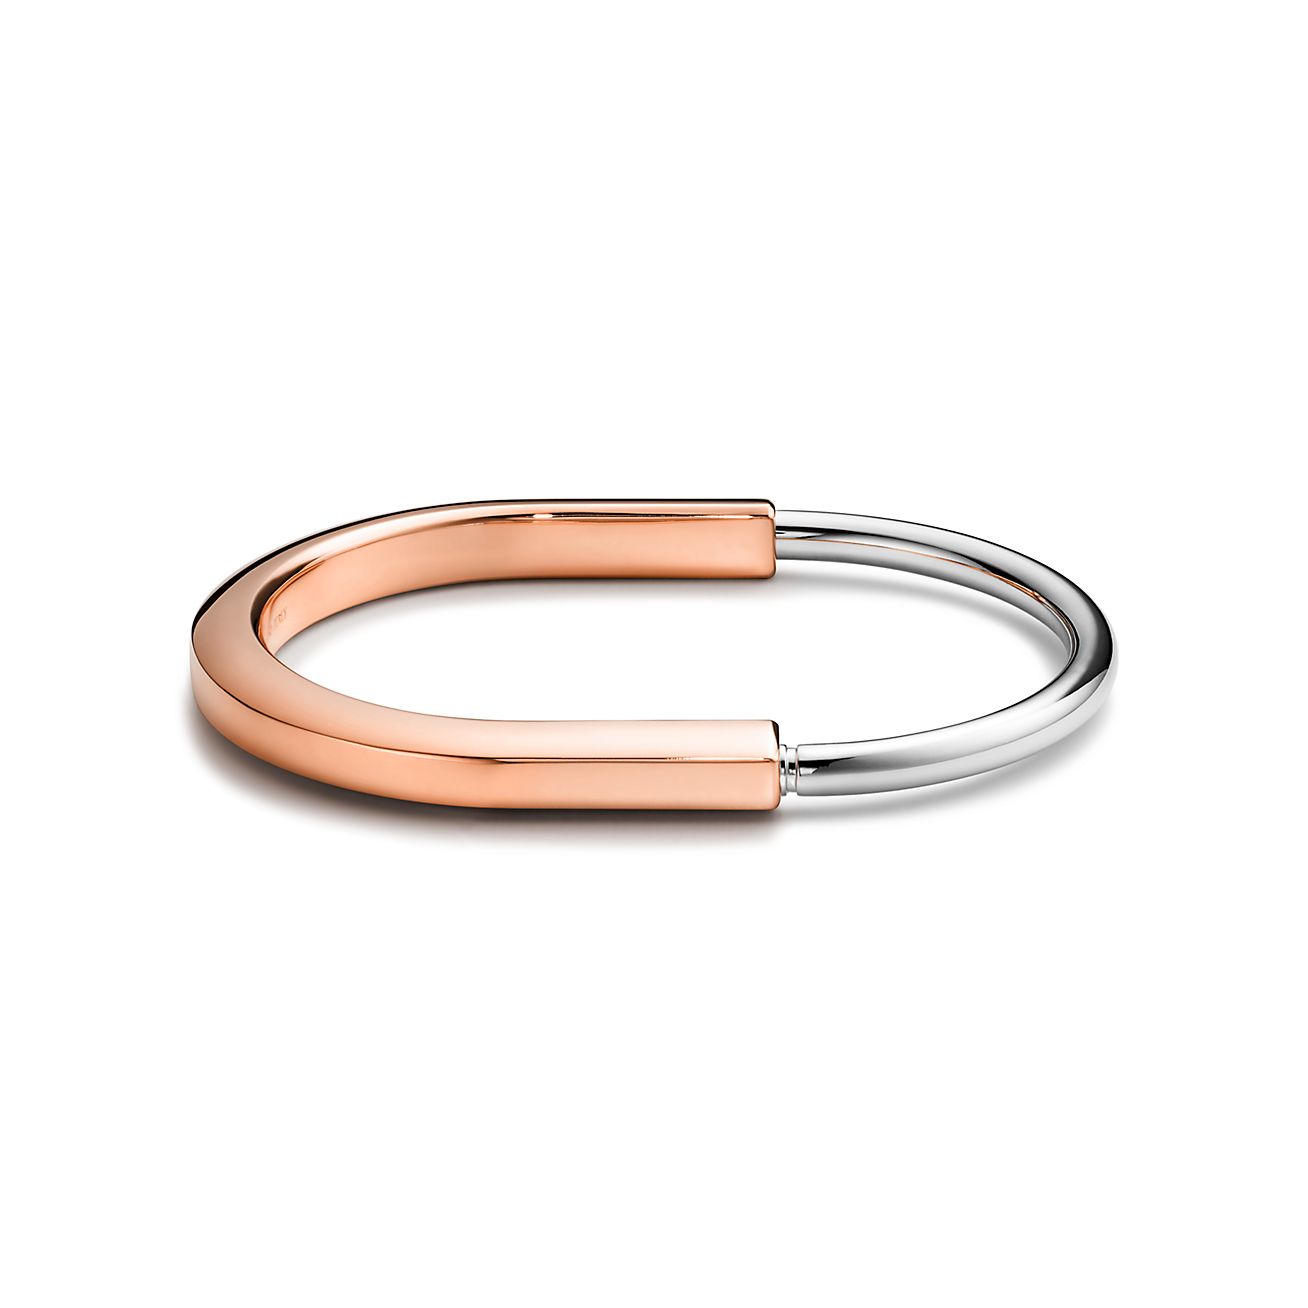 Cartier Love Bracelet Rose Gold Size 17 with Box, Papers & Screwdriver –  QUEEN MAY